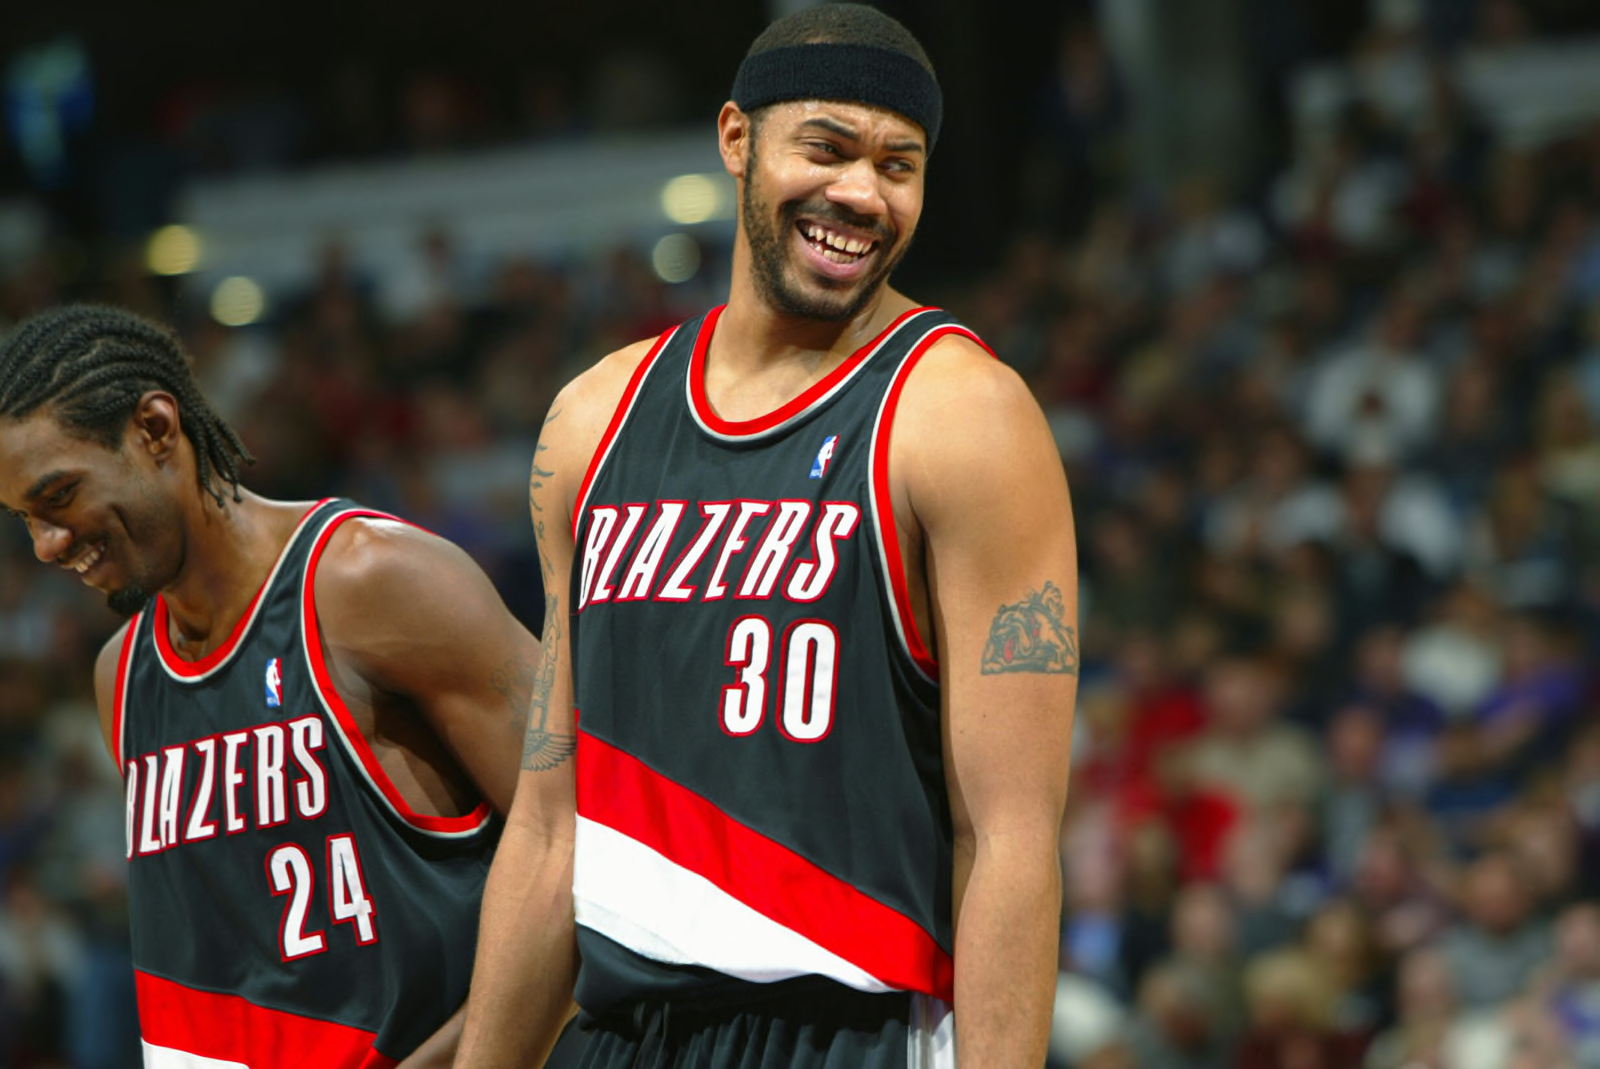 Blazers You'd Like to See Again Bracket: Wallace vs. Petrovic